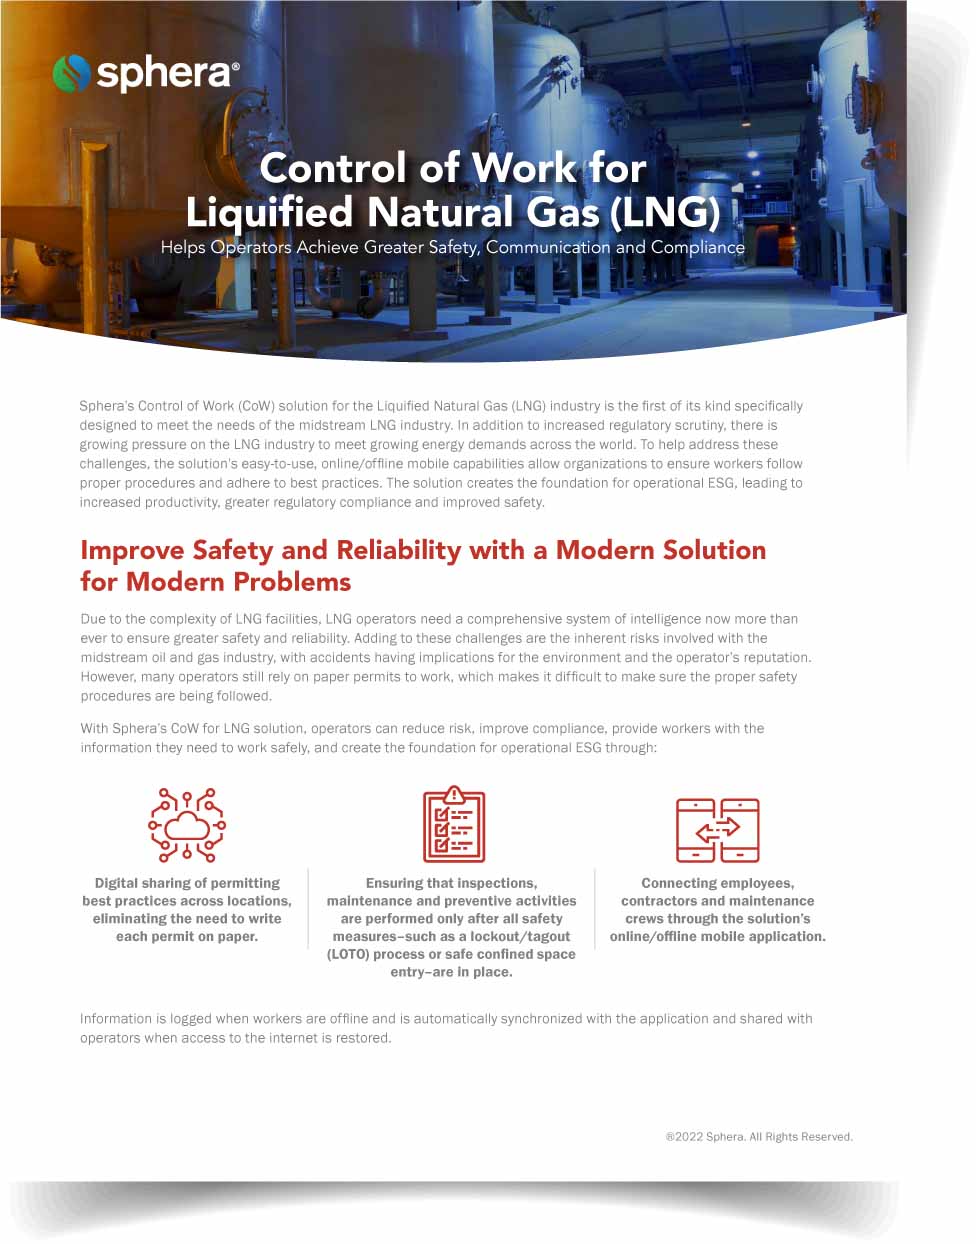 Control of Work for LNG Brochure